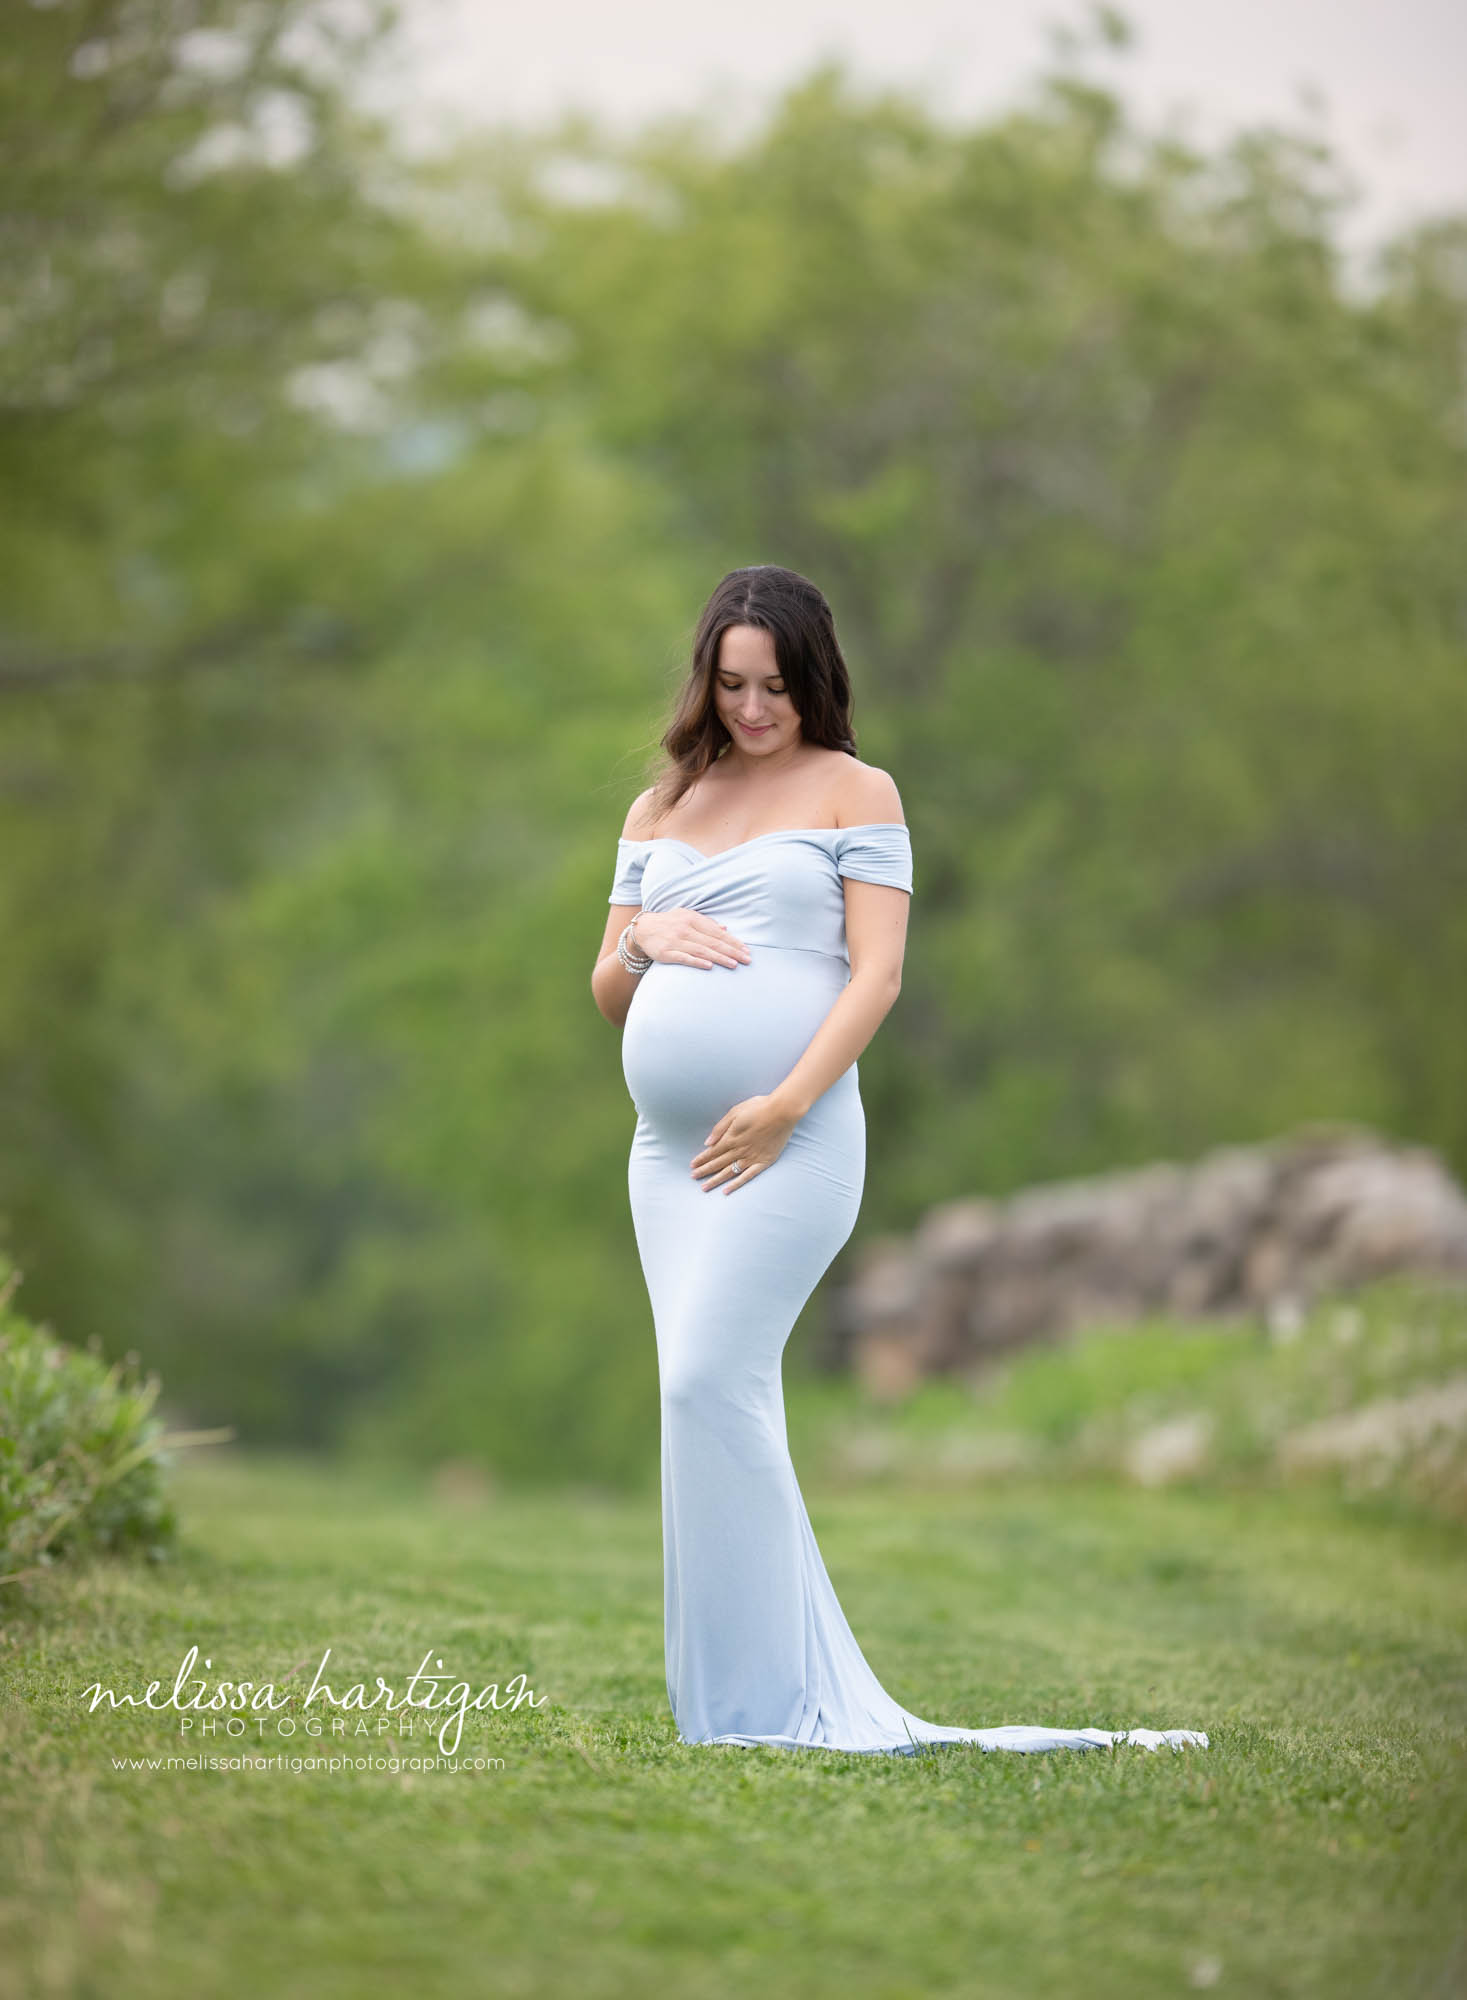 pregnant mom-to-be wearing light blue long form fitted maternity dress holding baby bump maternity photographer connecticut pregnancy session